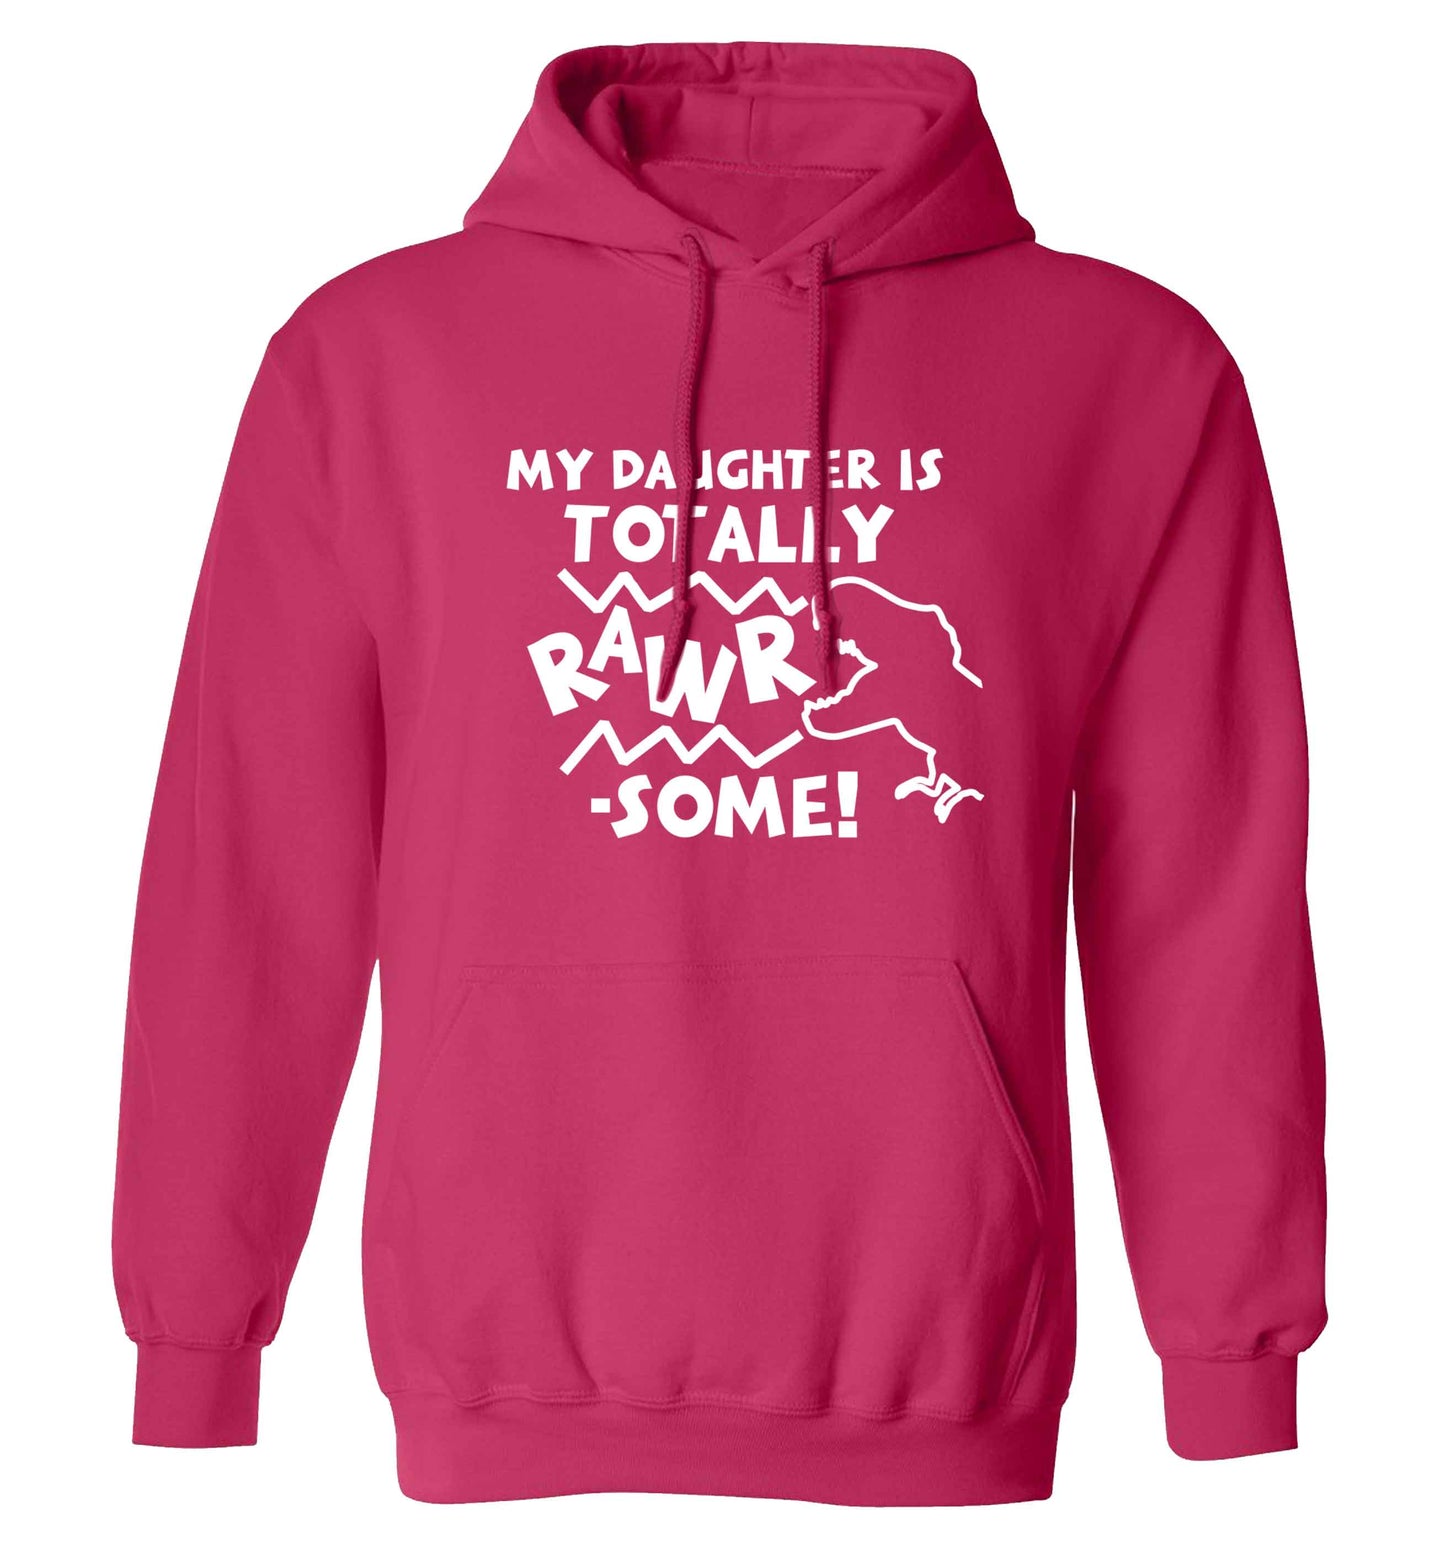 My daughter is totally rawrsome adults unisex pink hoodie 2XL